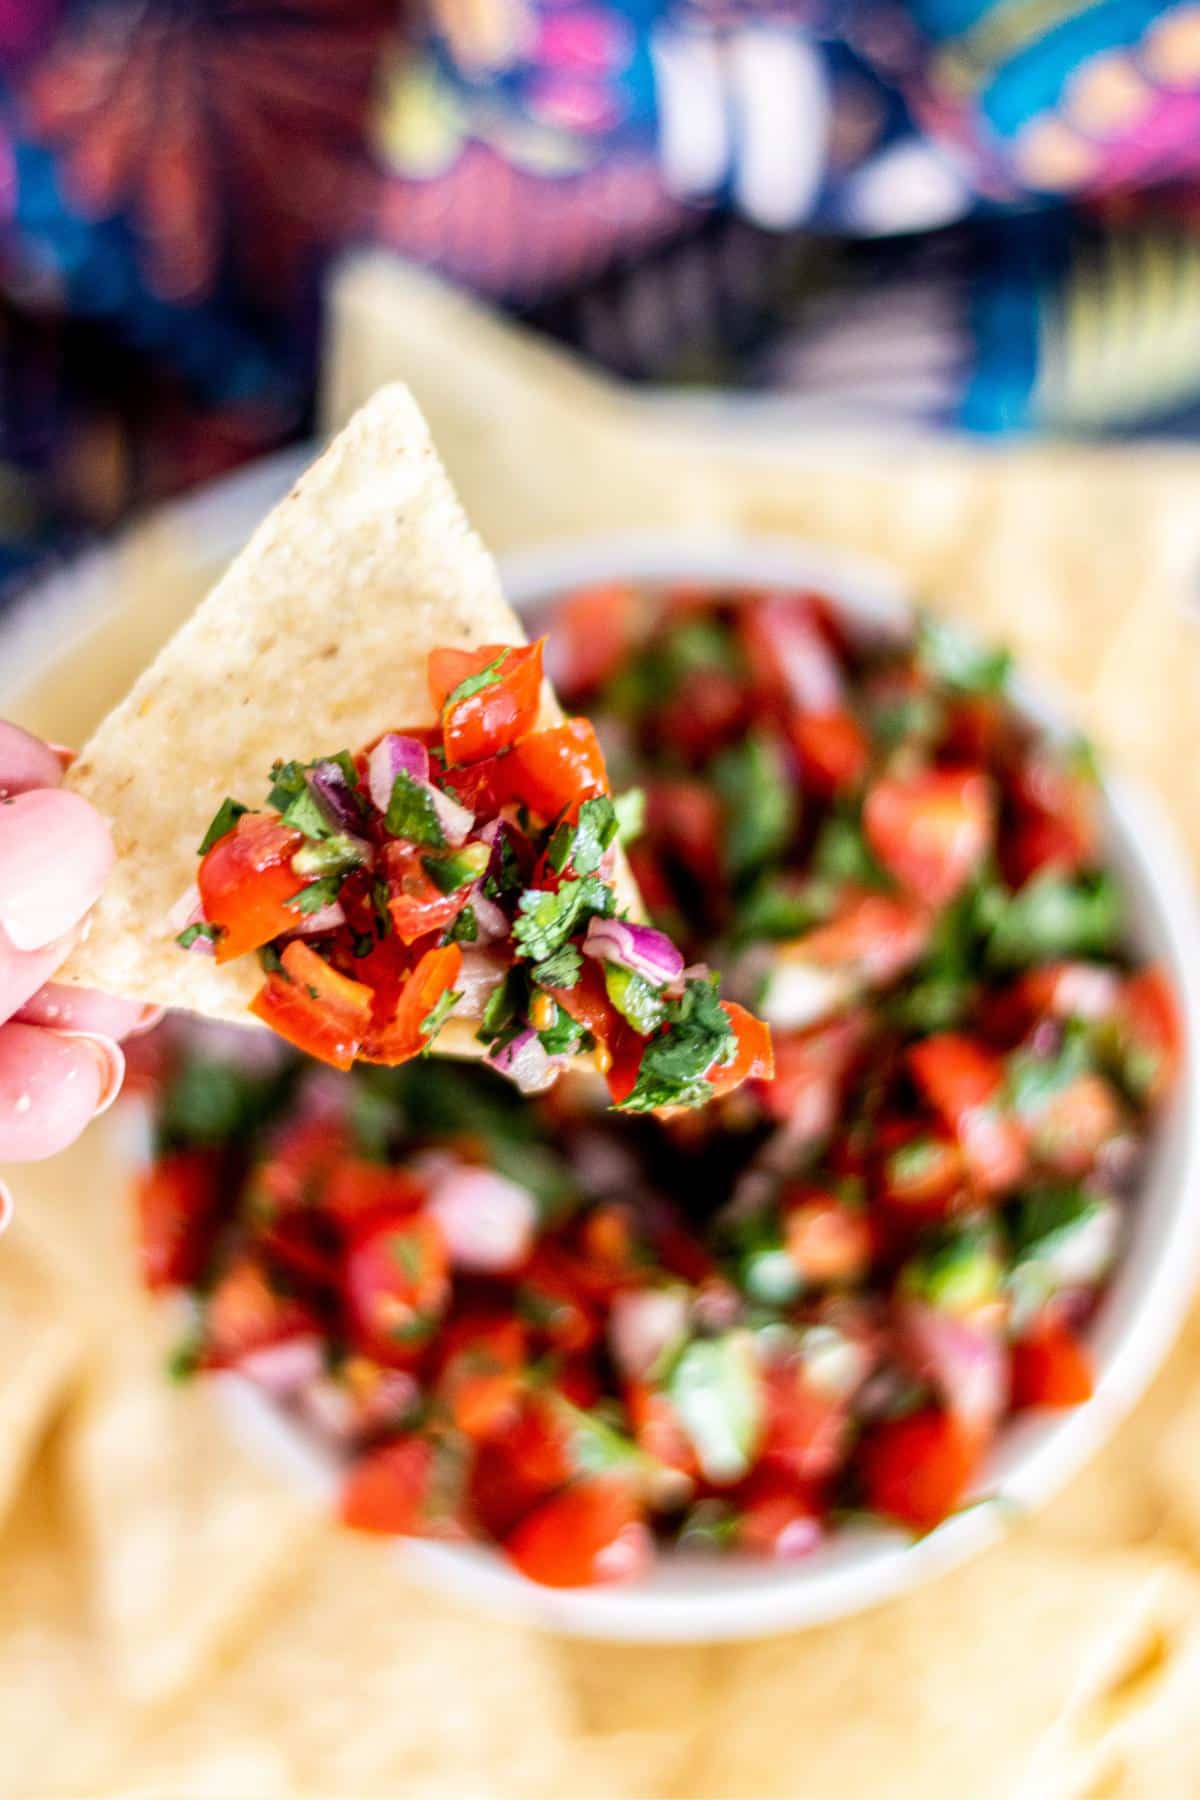 Hand holding tortilla chip with salsa on it.